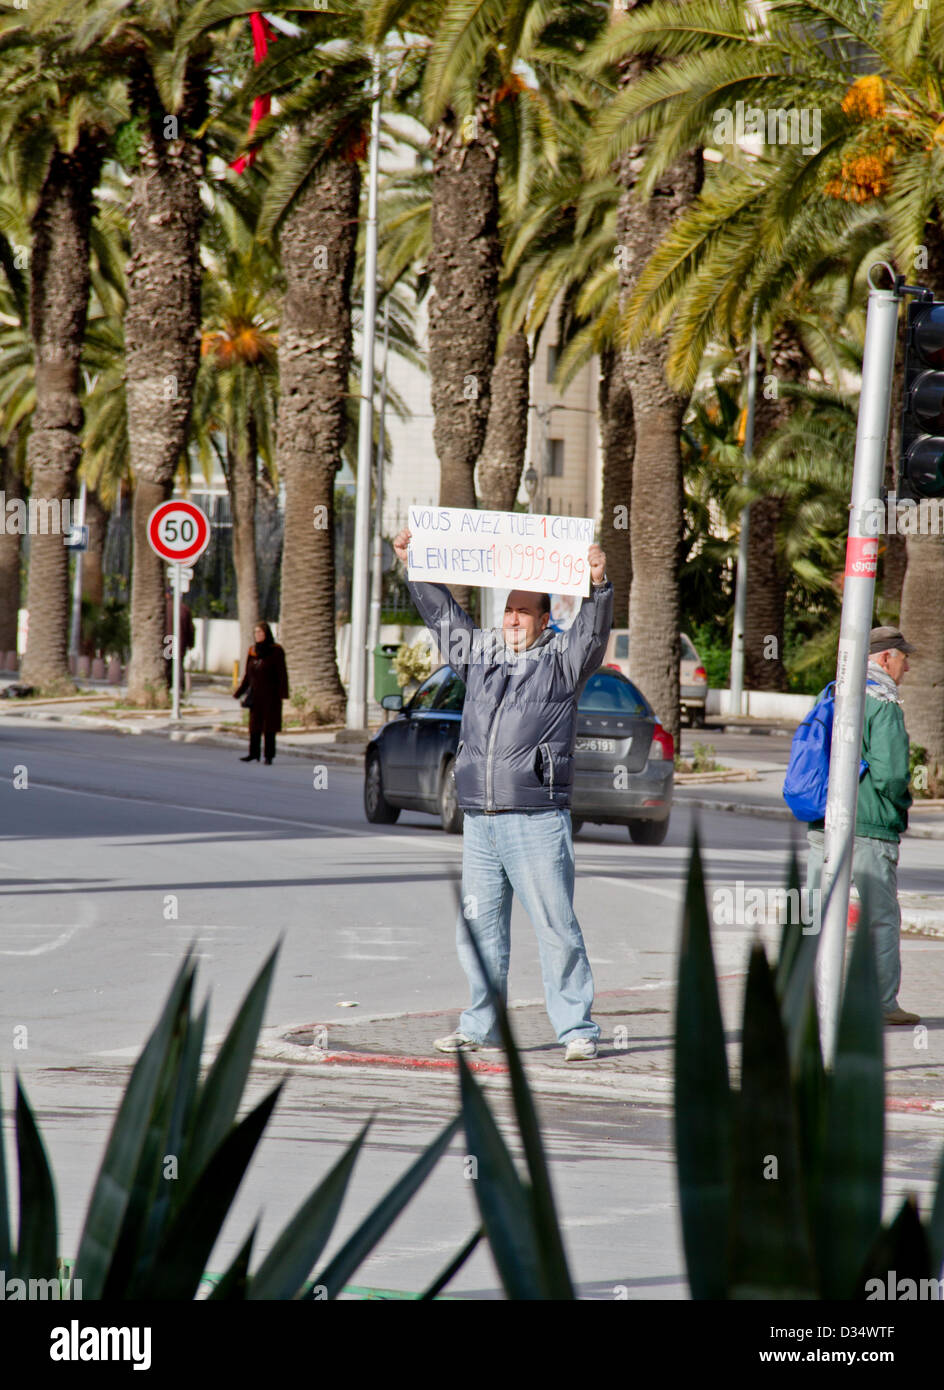 a man holding a sign which reads 'you killed 1 chokri, but there is 10999.999's chokri' during the protests after Tunisian opposition leader Chokri Belaid's murder in Tunis, Tunisia on Friday 08 Feb 2013. Stock Photo